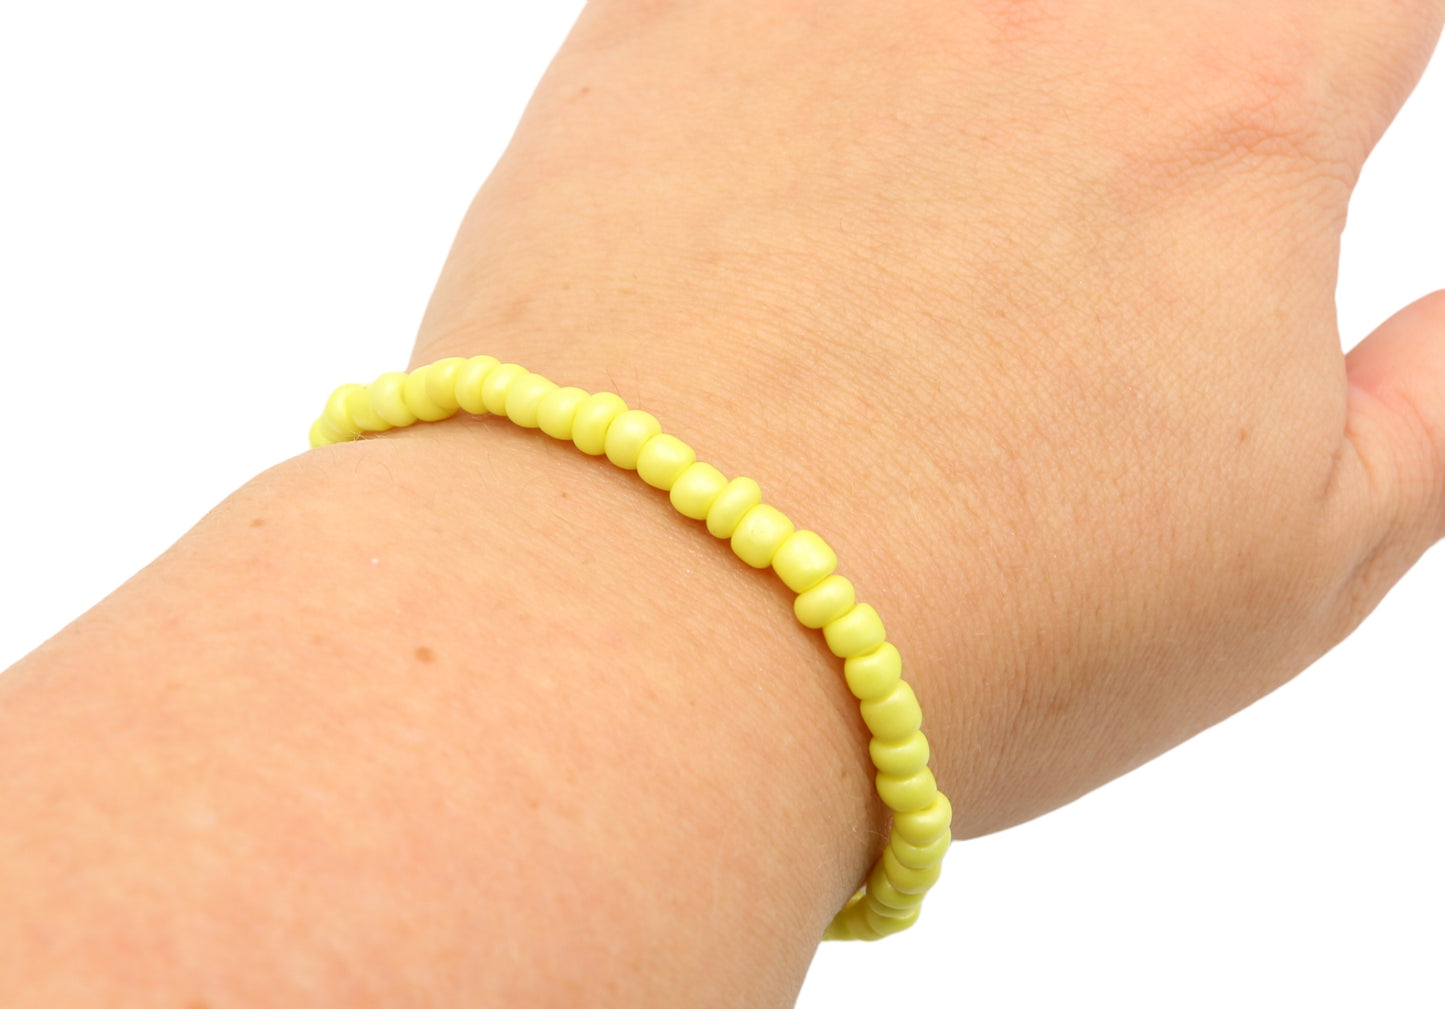 Electric Lemon We Got That Electric Yellow HOT Add On Bling - Bright Yellow Mix and Match Add On Glass Bead Bracelet by Monkey's Mojo